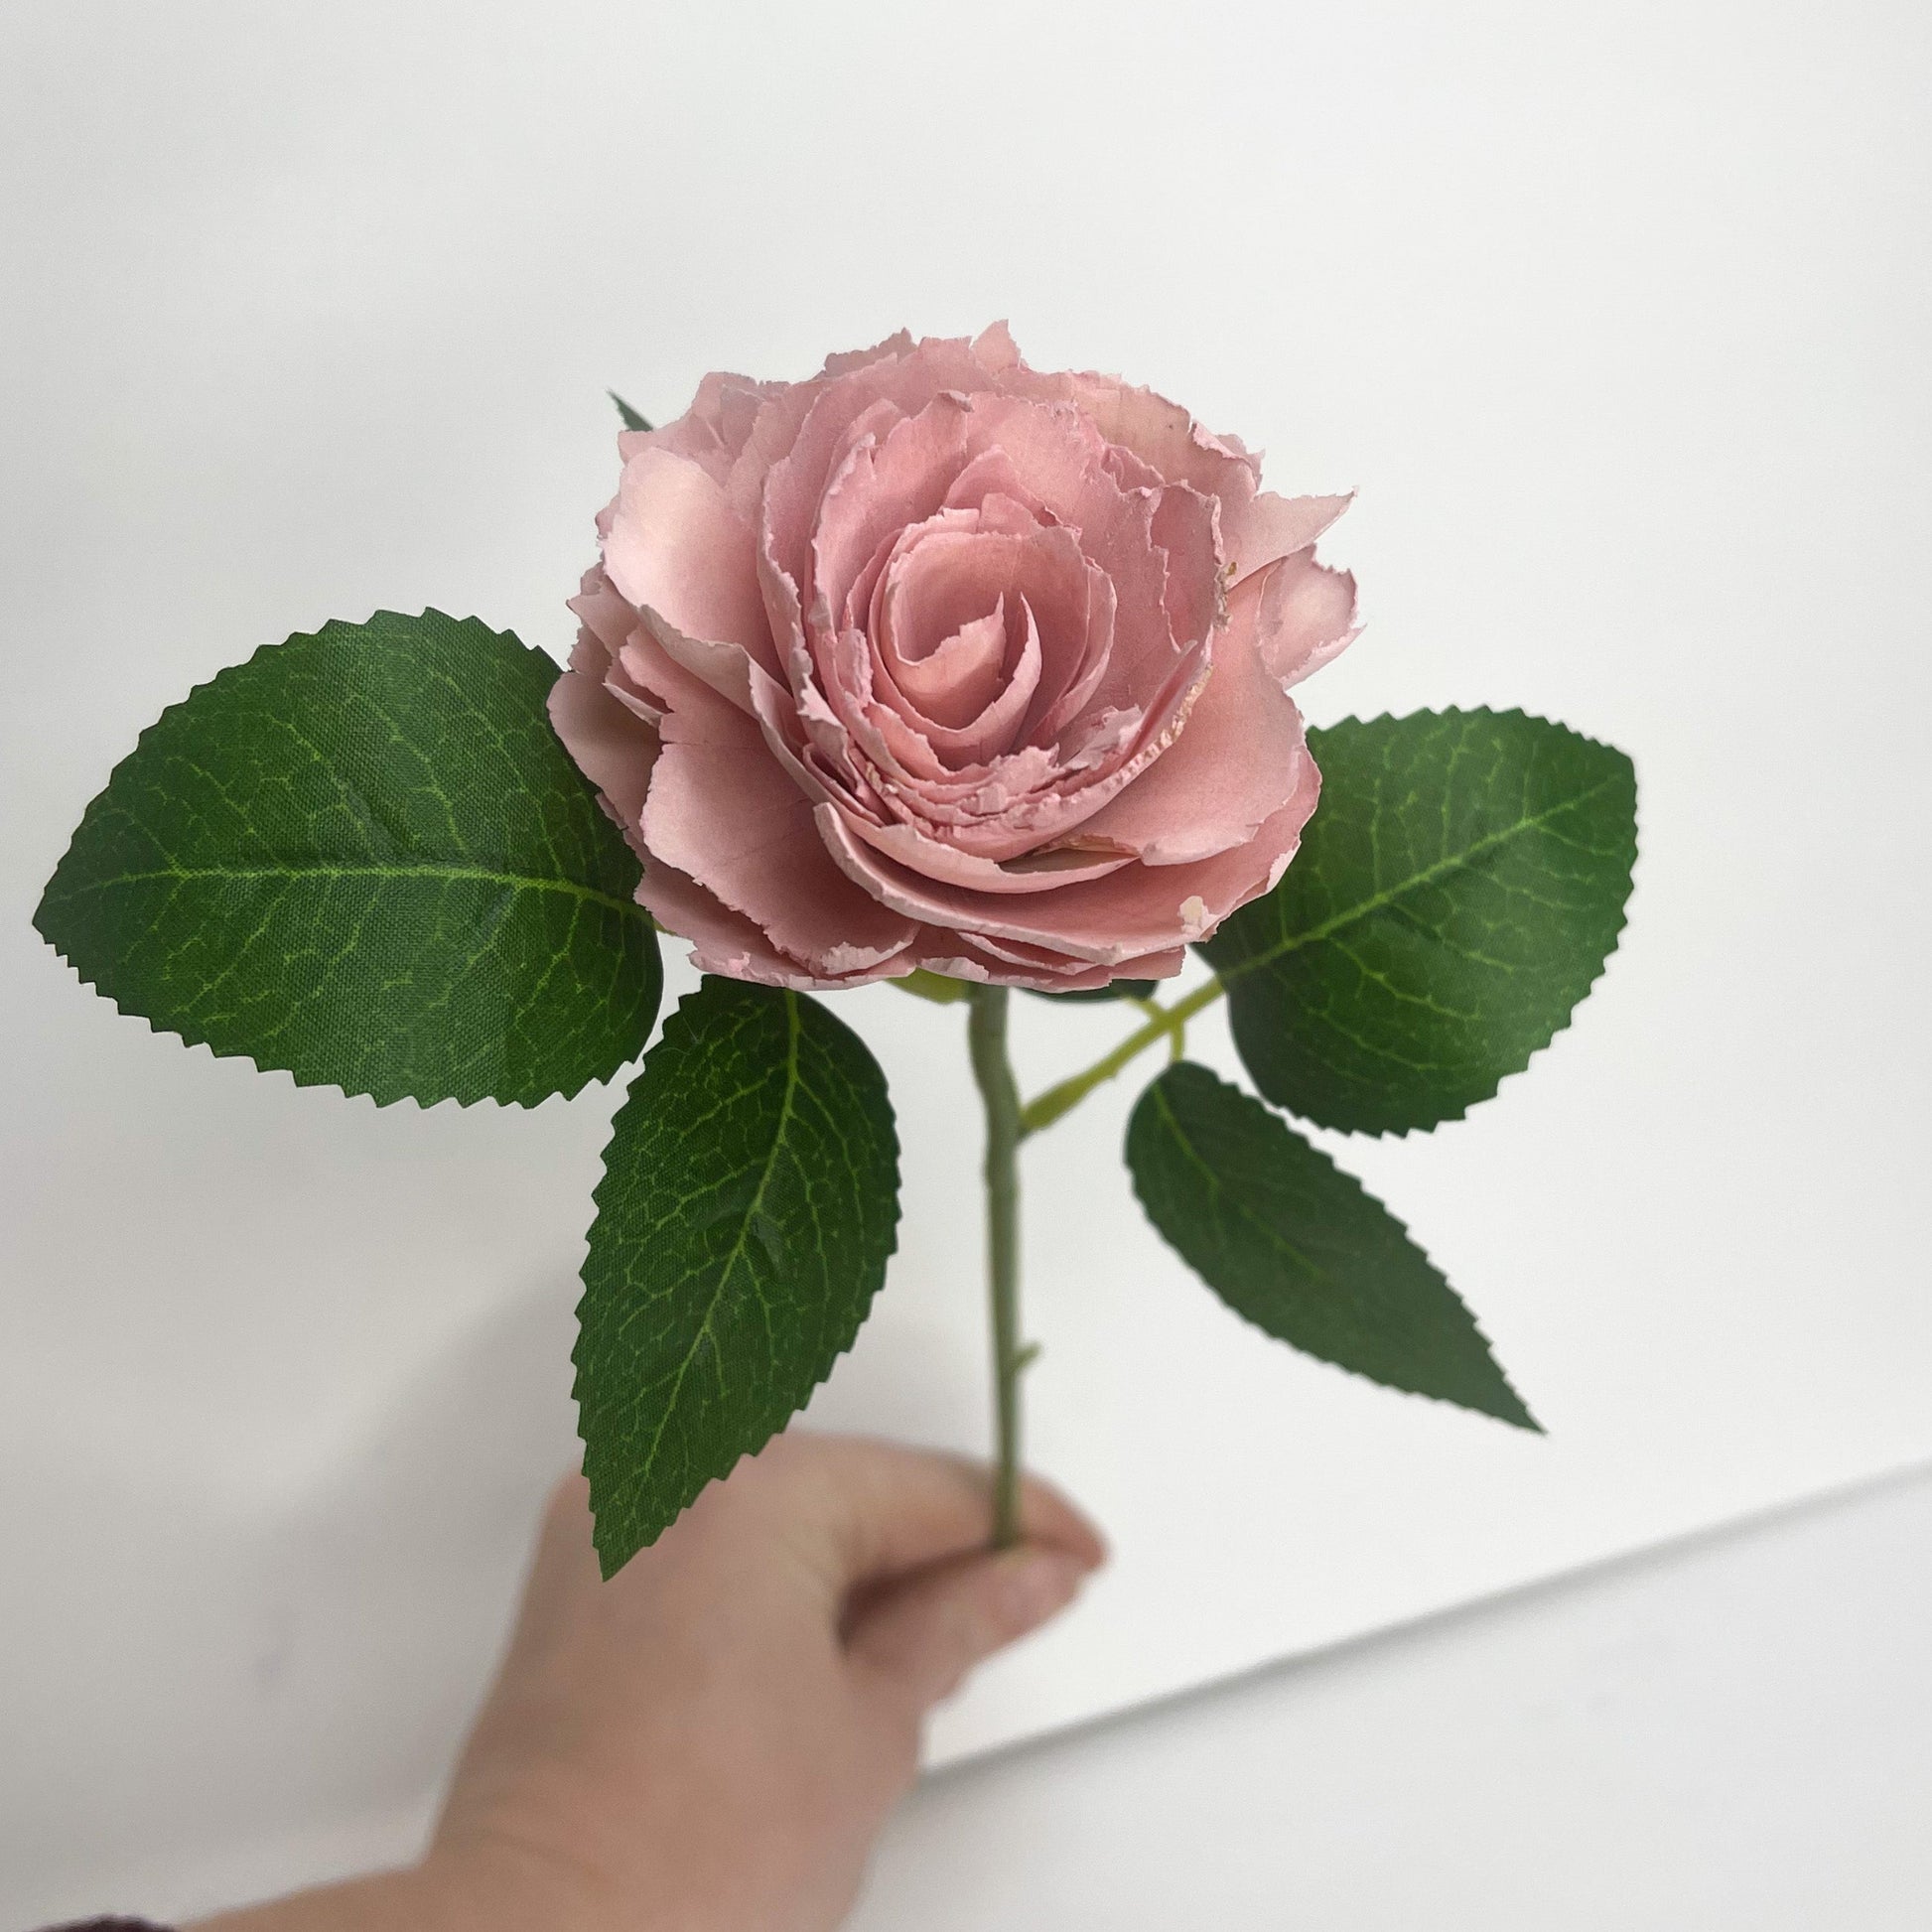 Single stem pink ruffled wooden rose with green leaves.